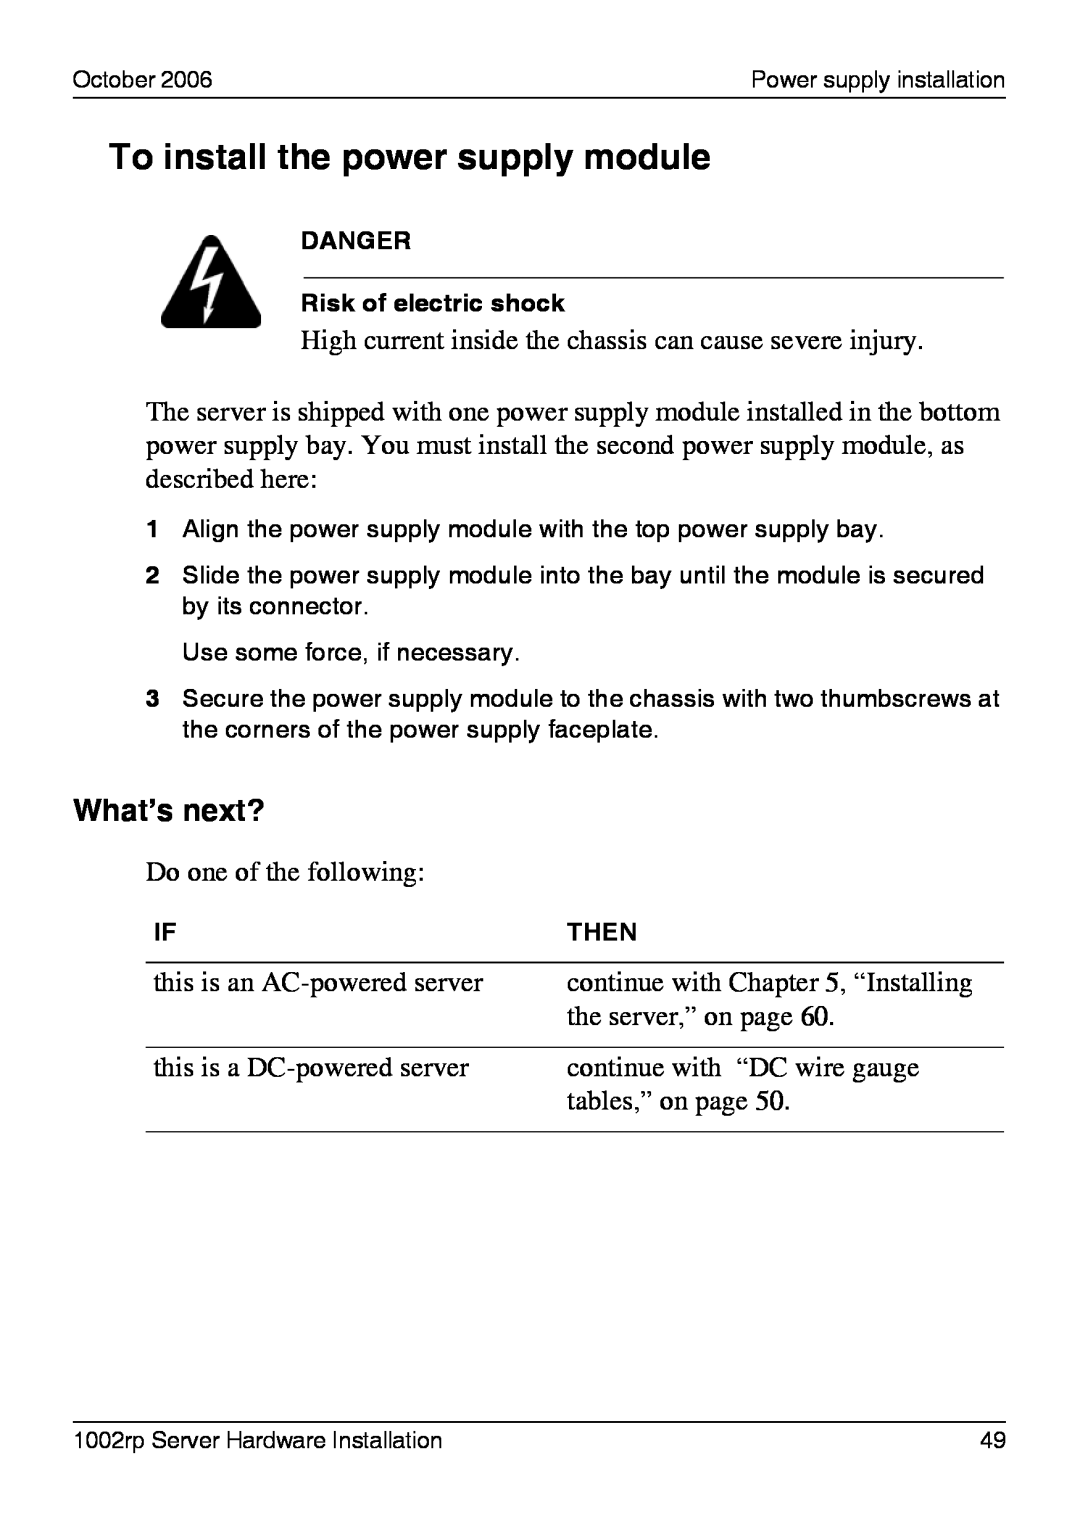 Nortel Networks 1002rp manual To install the power supply module, What’s next? 